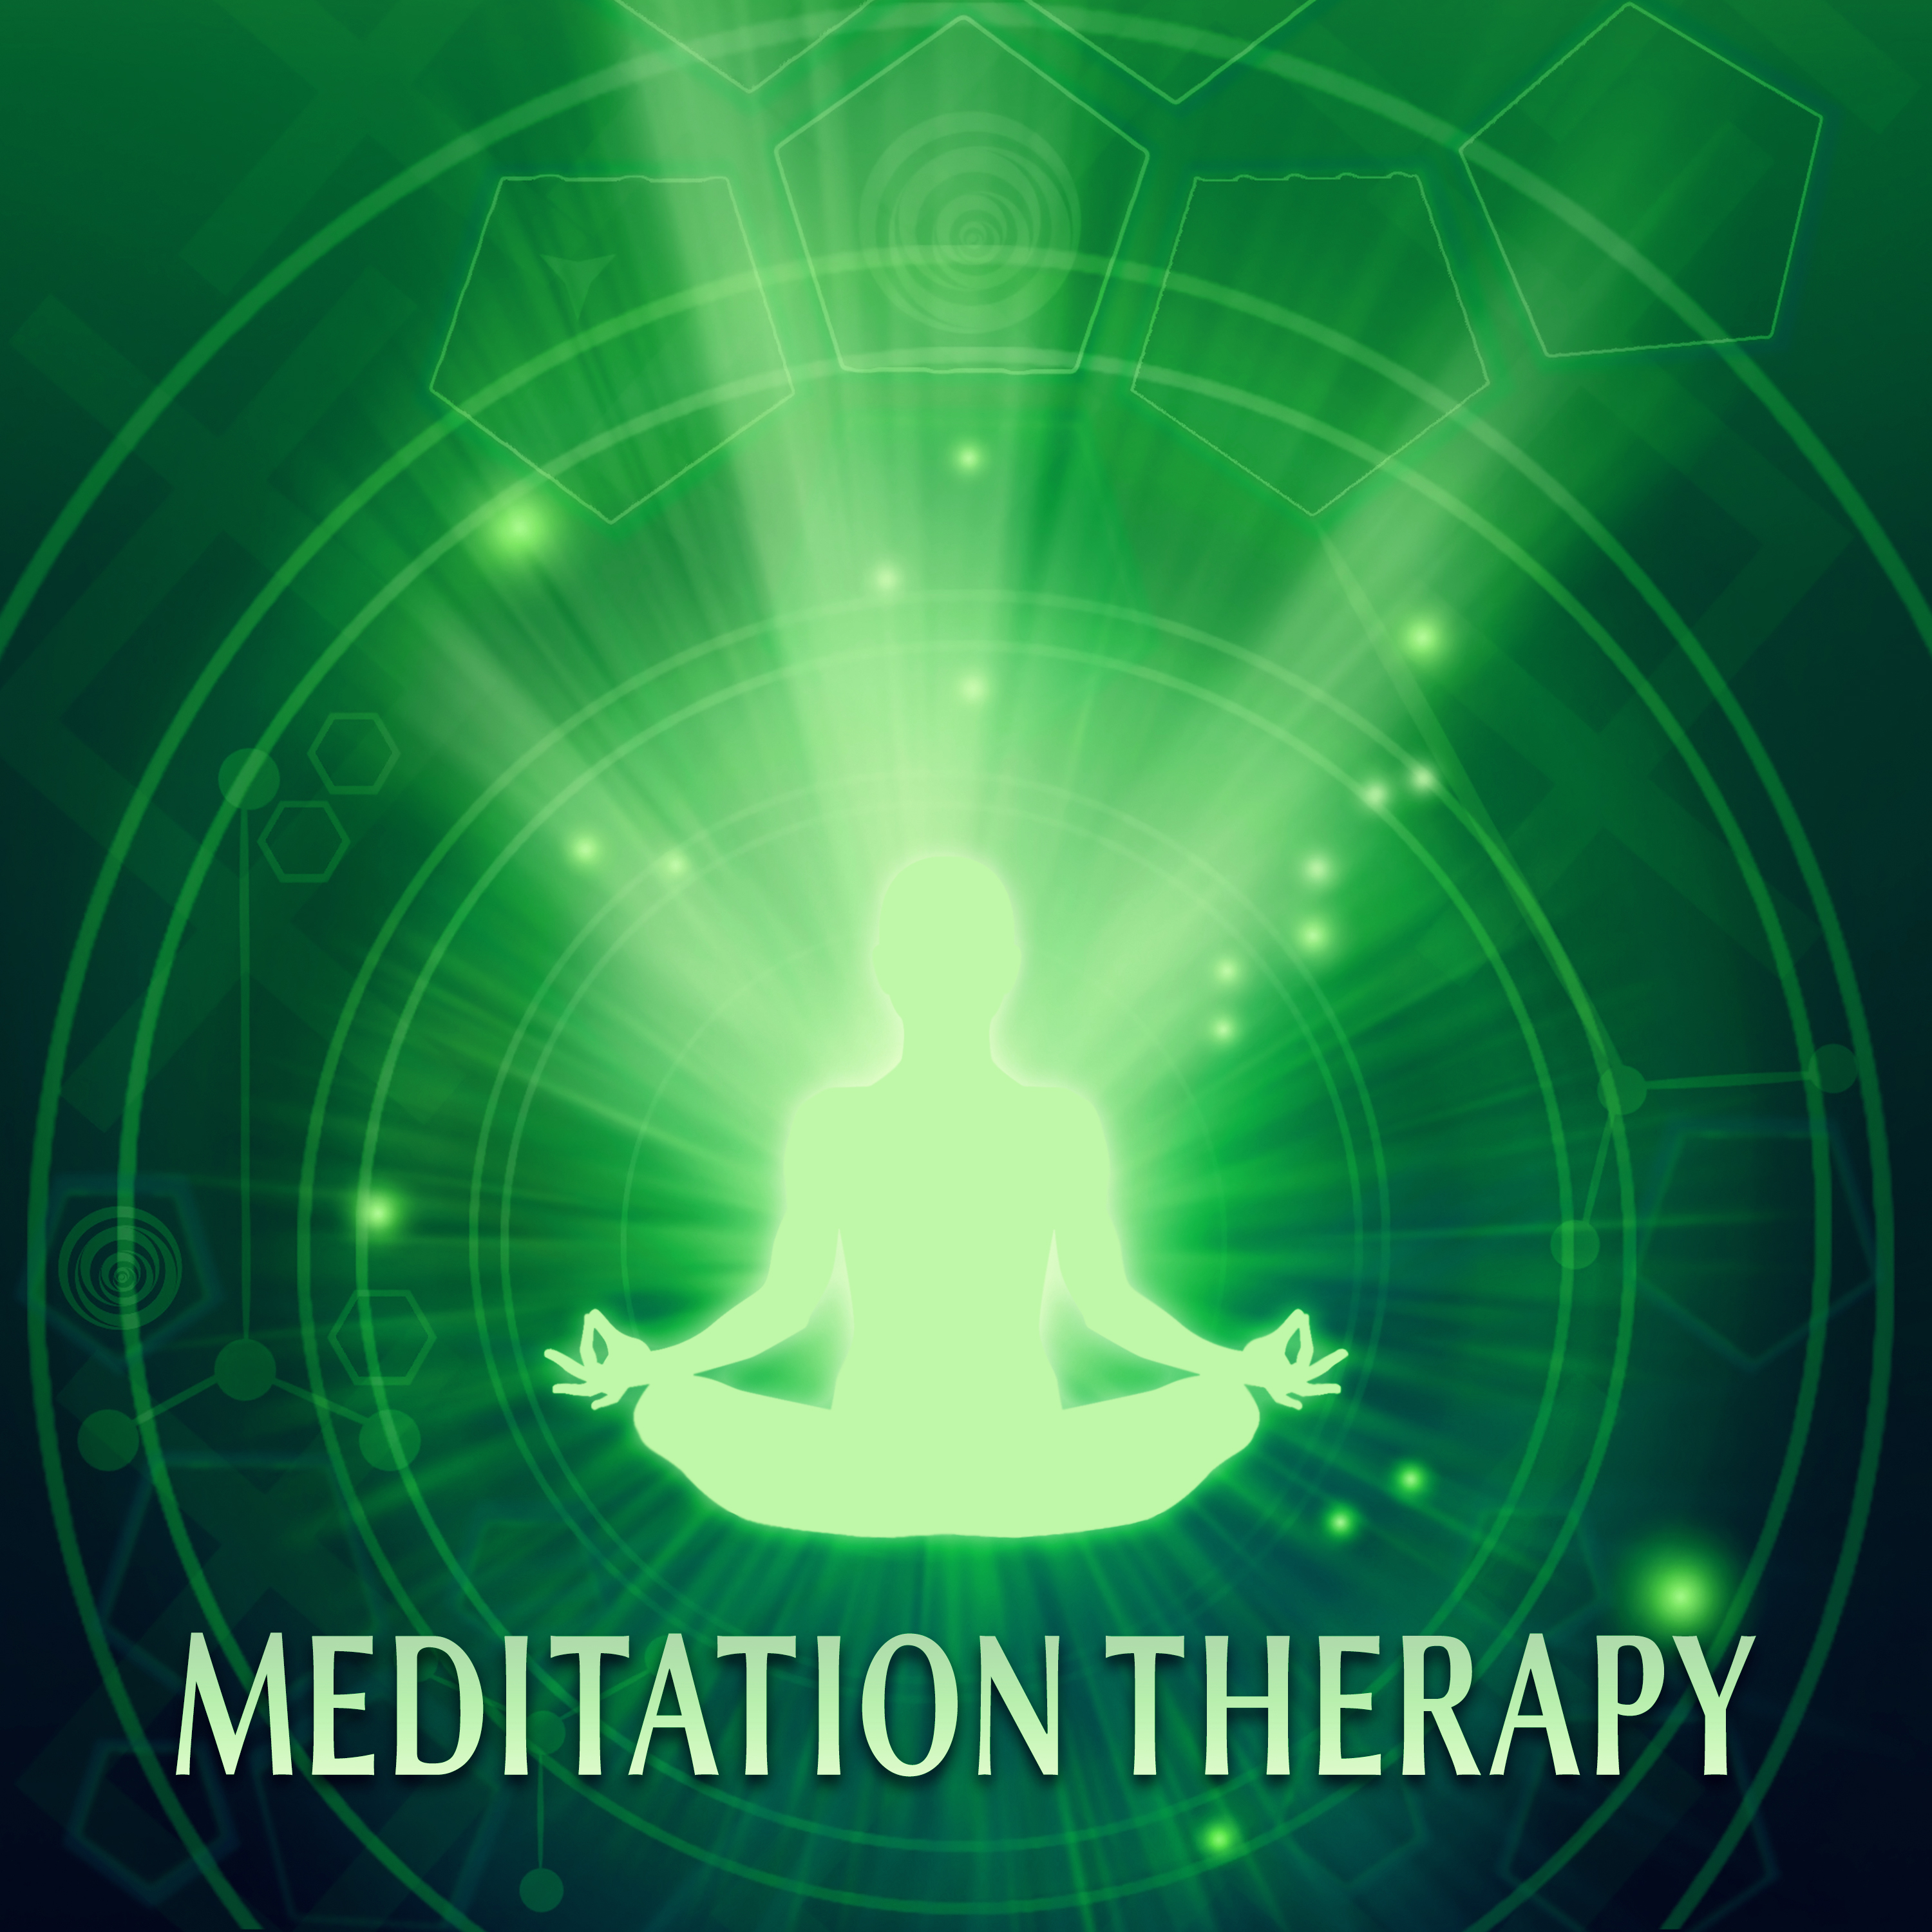 Meditation Therapy  Sounds of Meditation, Yoga Music, Contemplation, Well Being